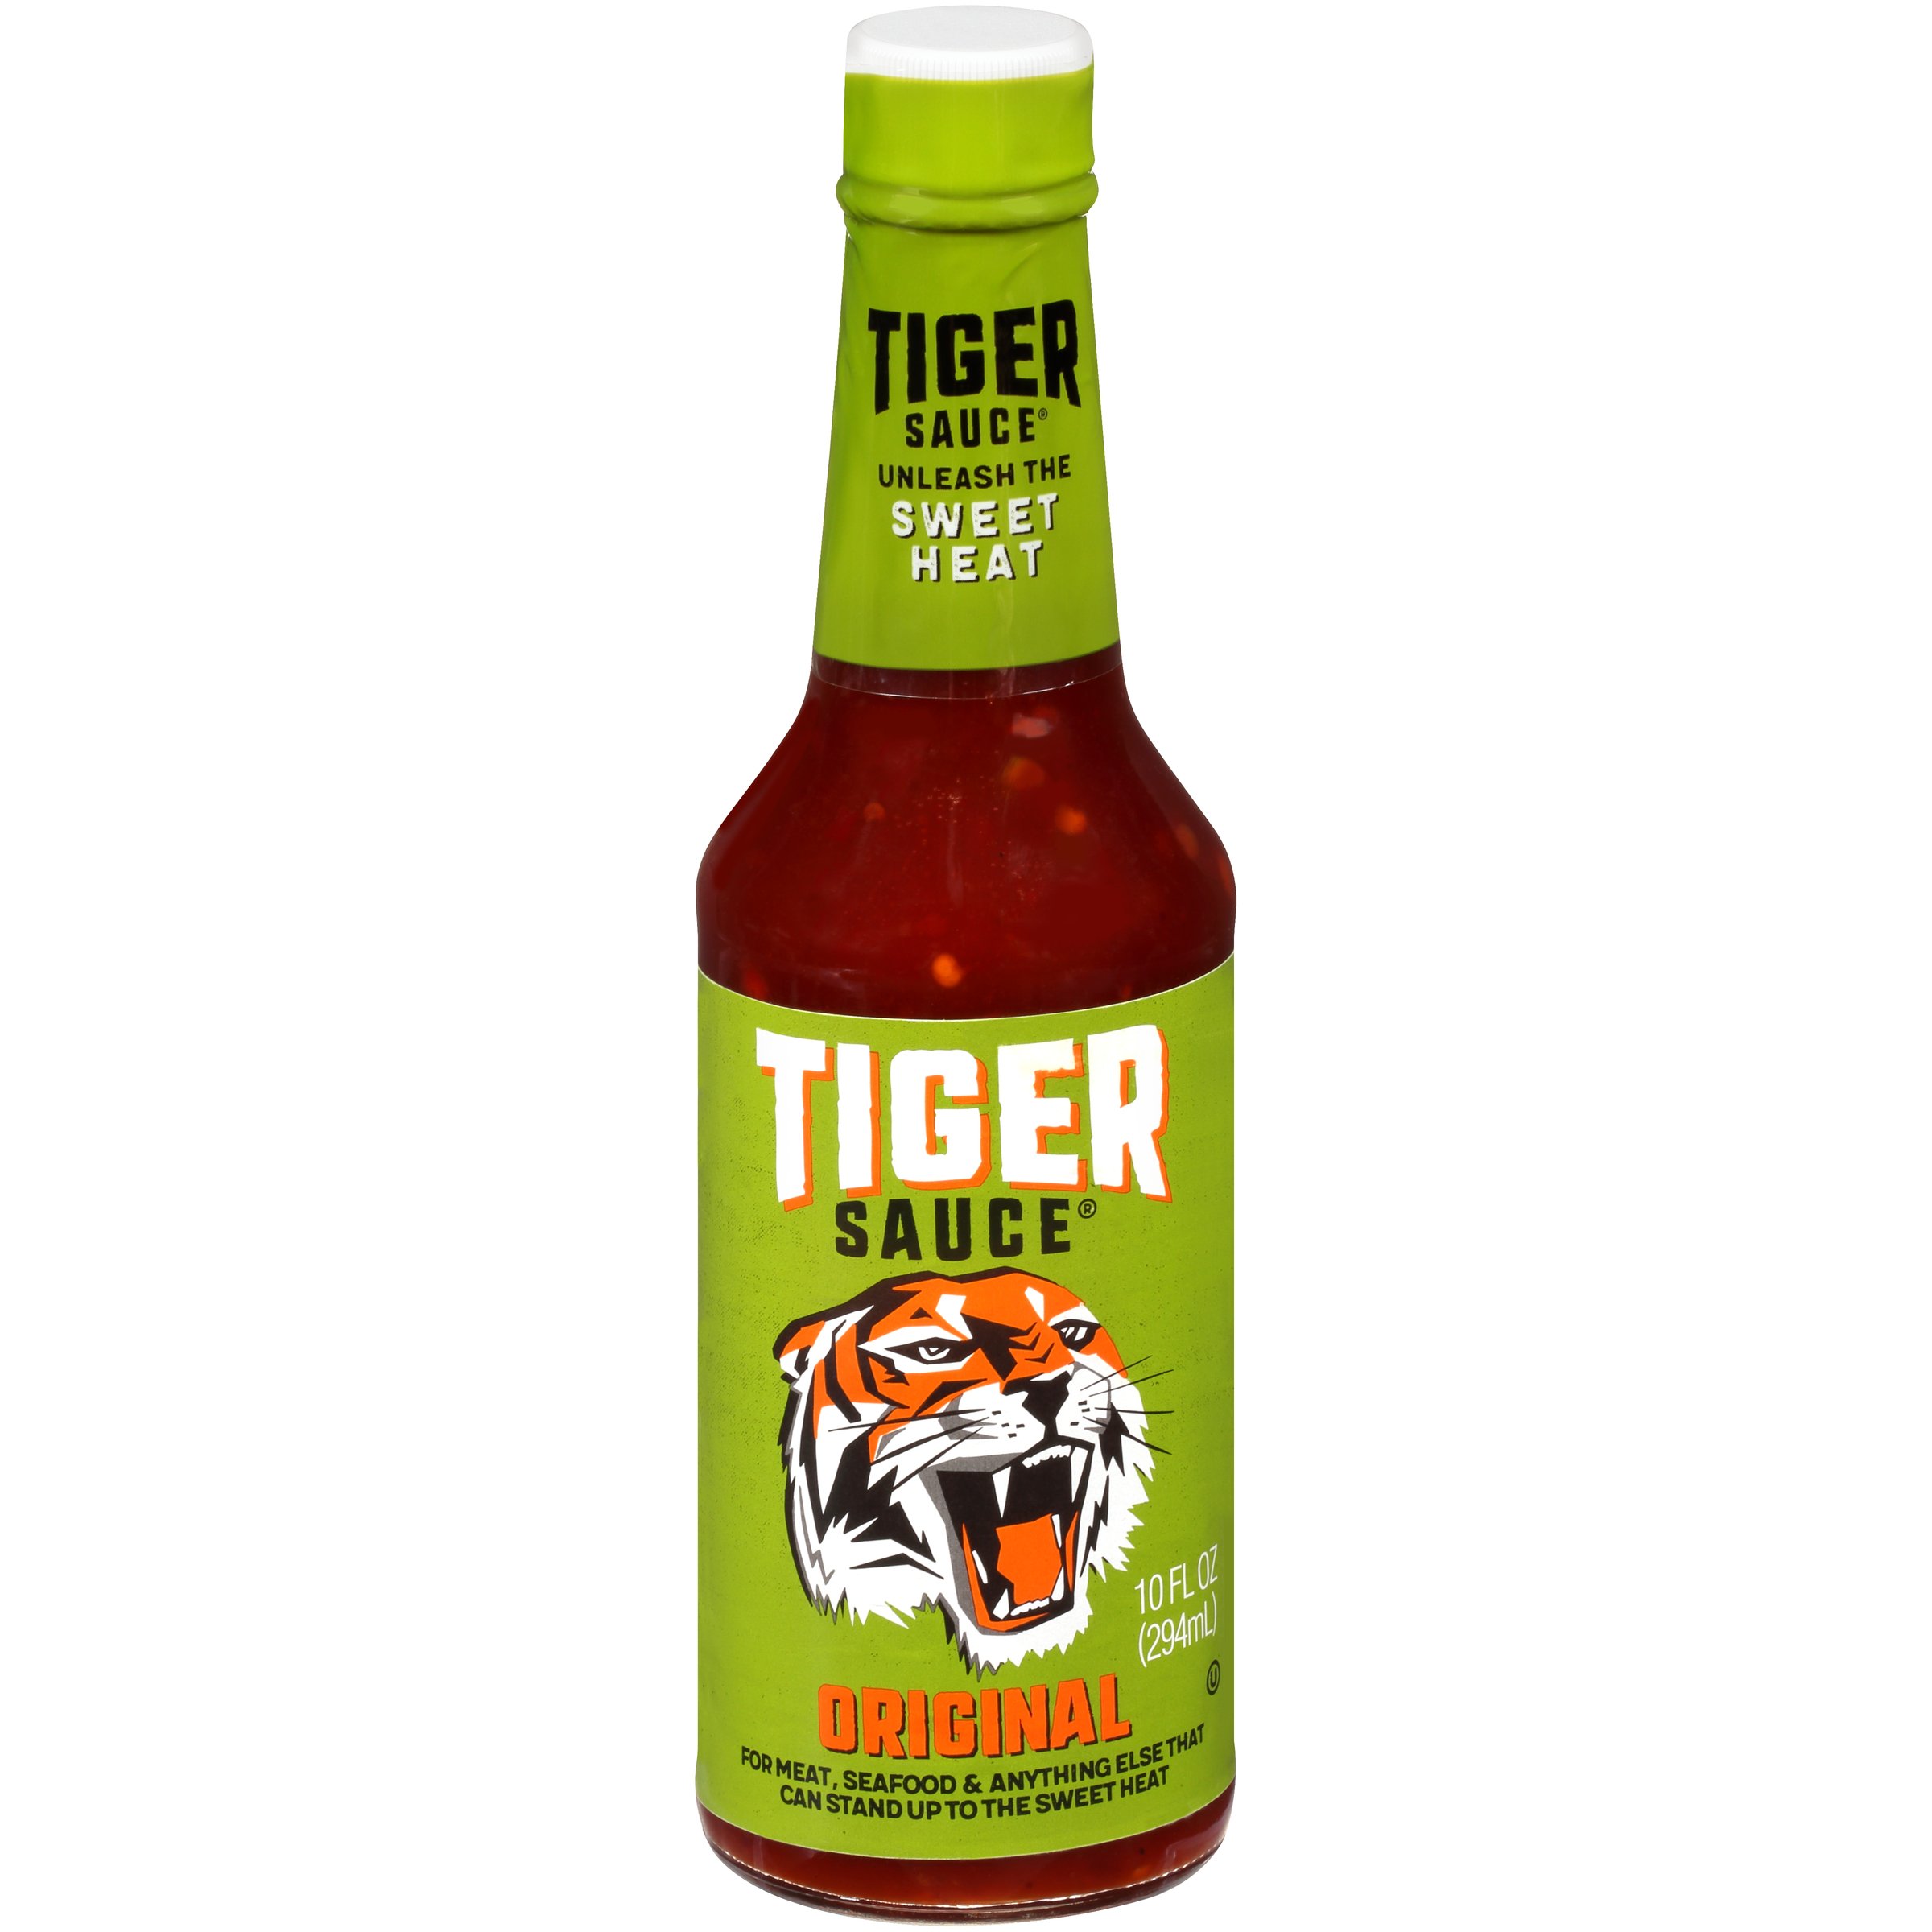 Tiger Sauce - Let's Look Again